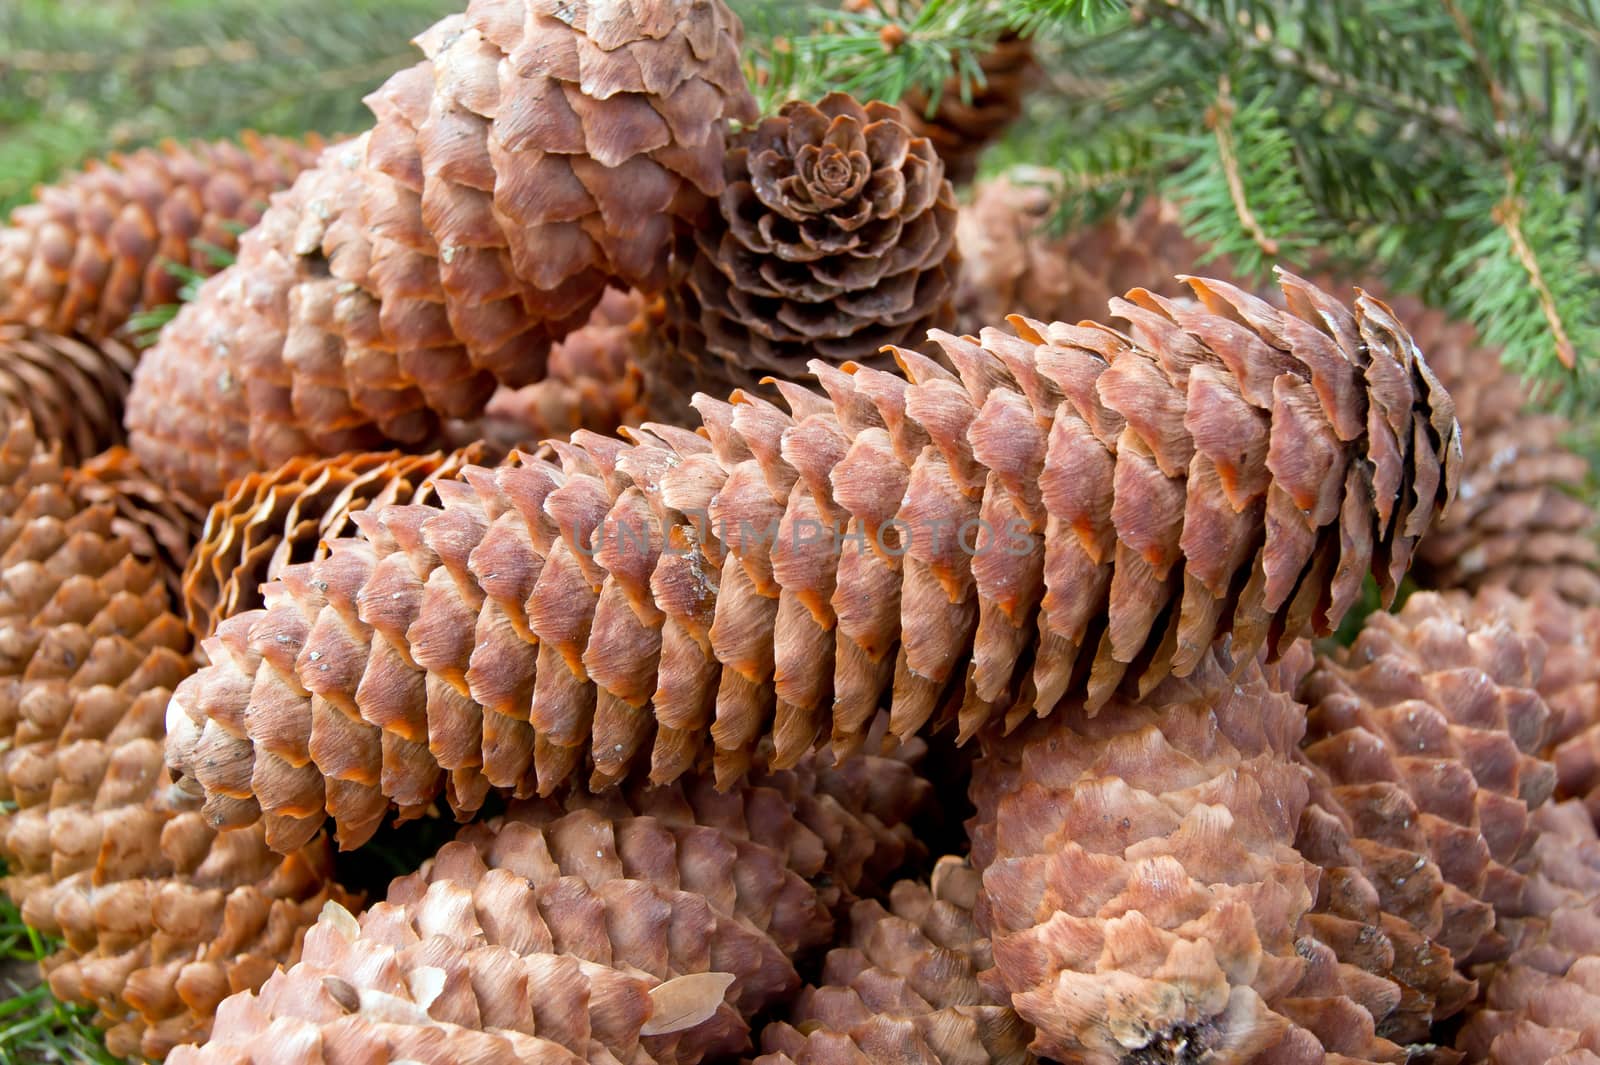 Mature spruce (Picea Abies) cone on the ground.